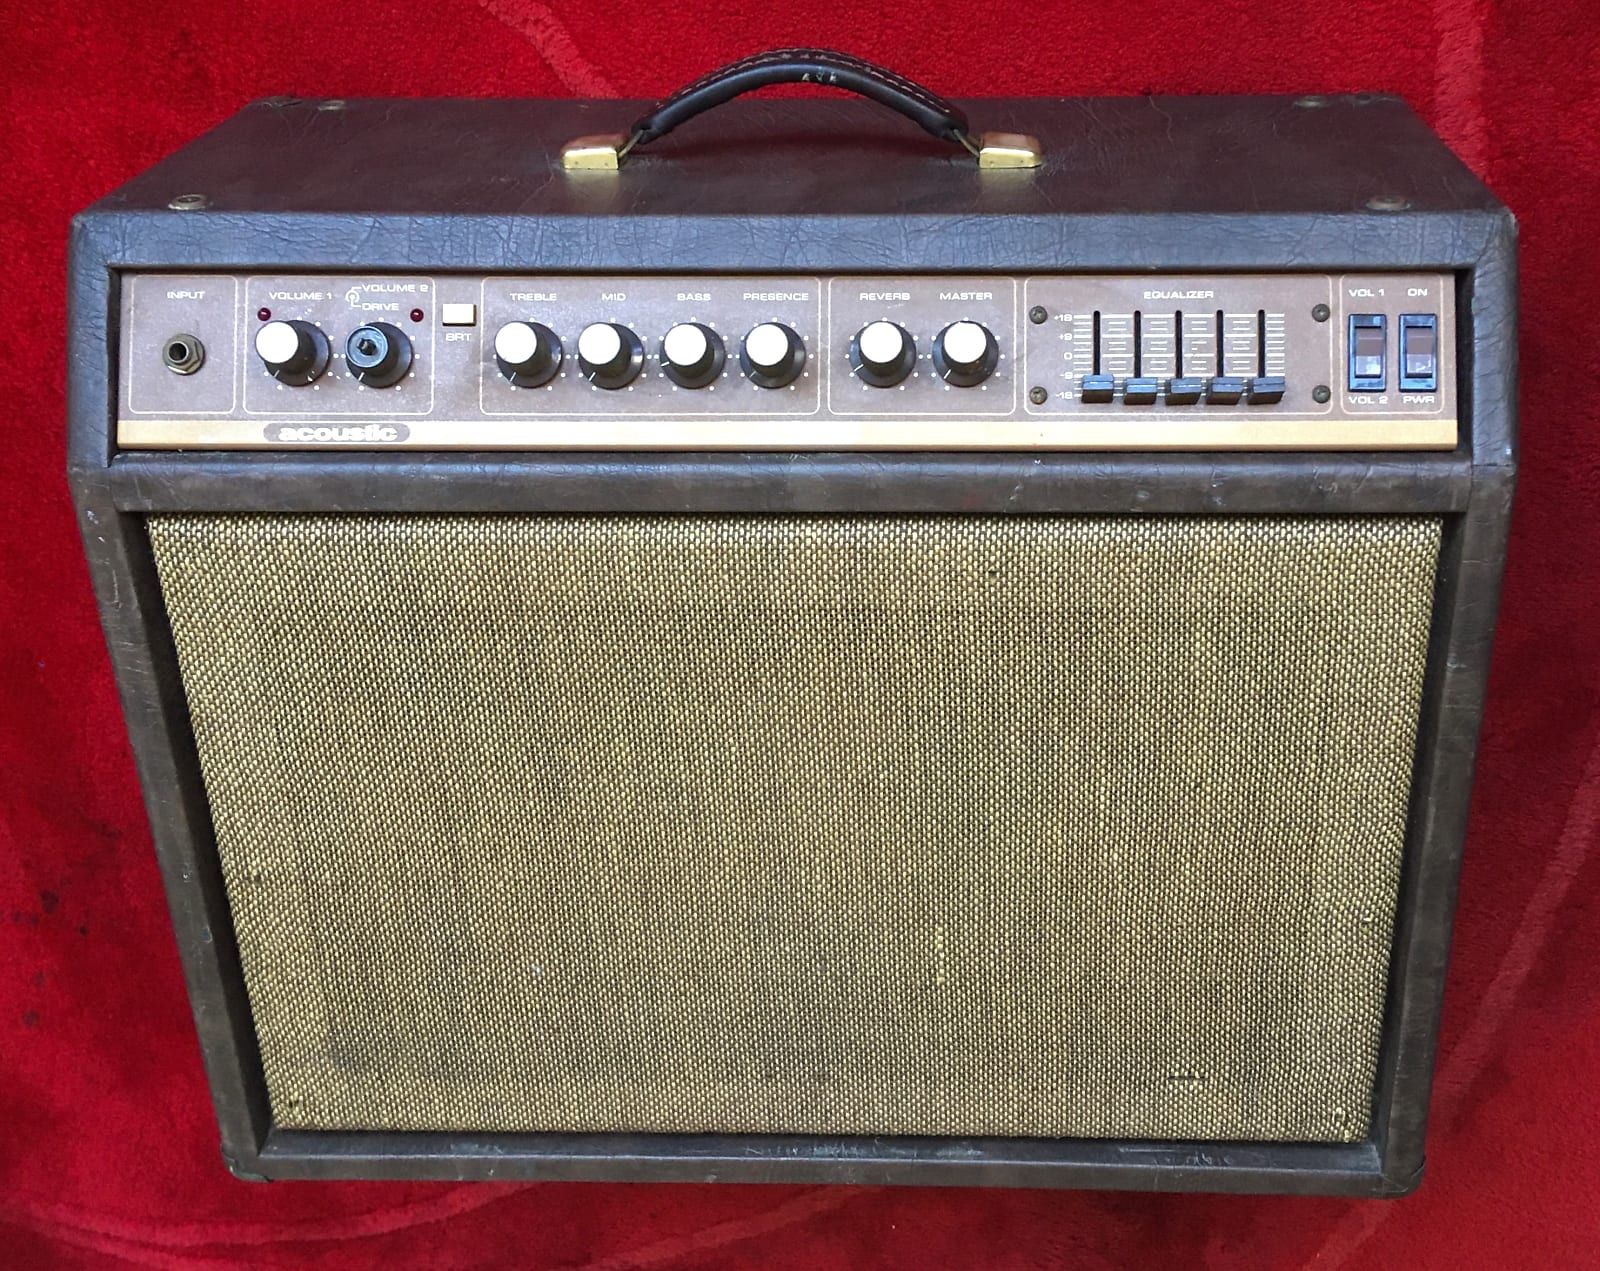 RARE Acoustic Model 123 vintage 80s combo guitar amplifier G120 with 1x12” speaker!